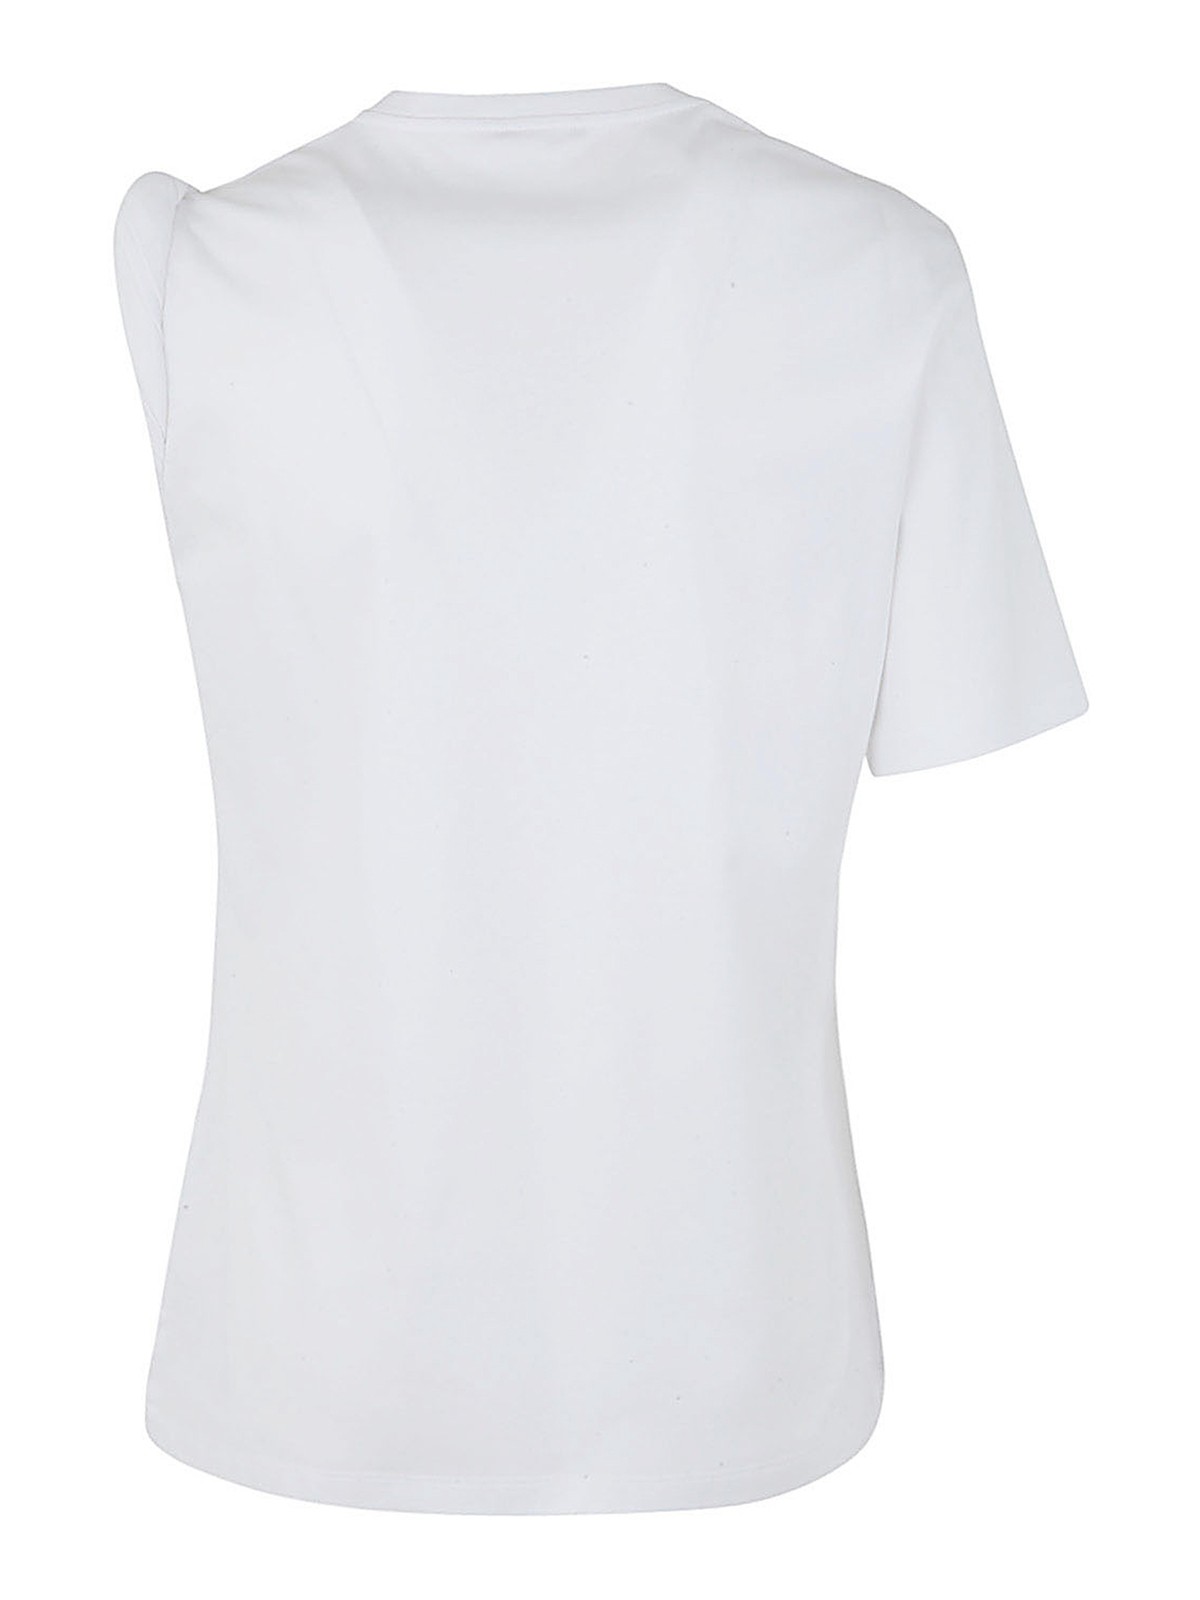 Shop Versace Printed Cotton T-shirt In White